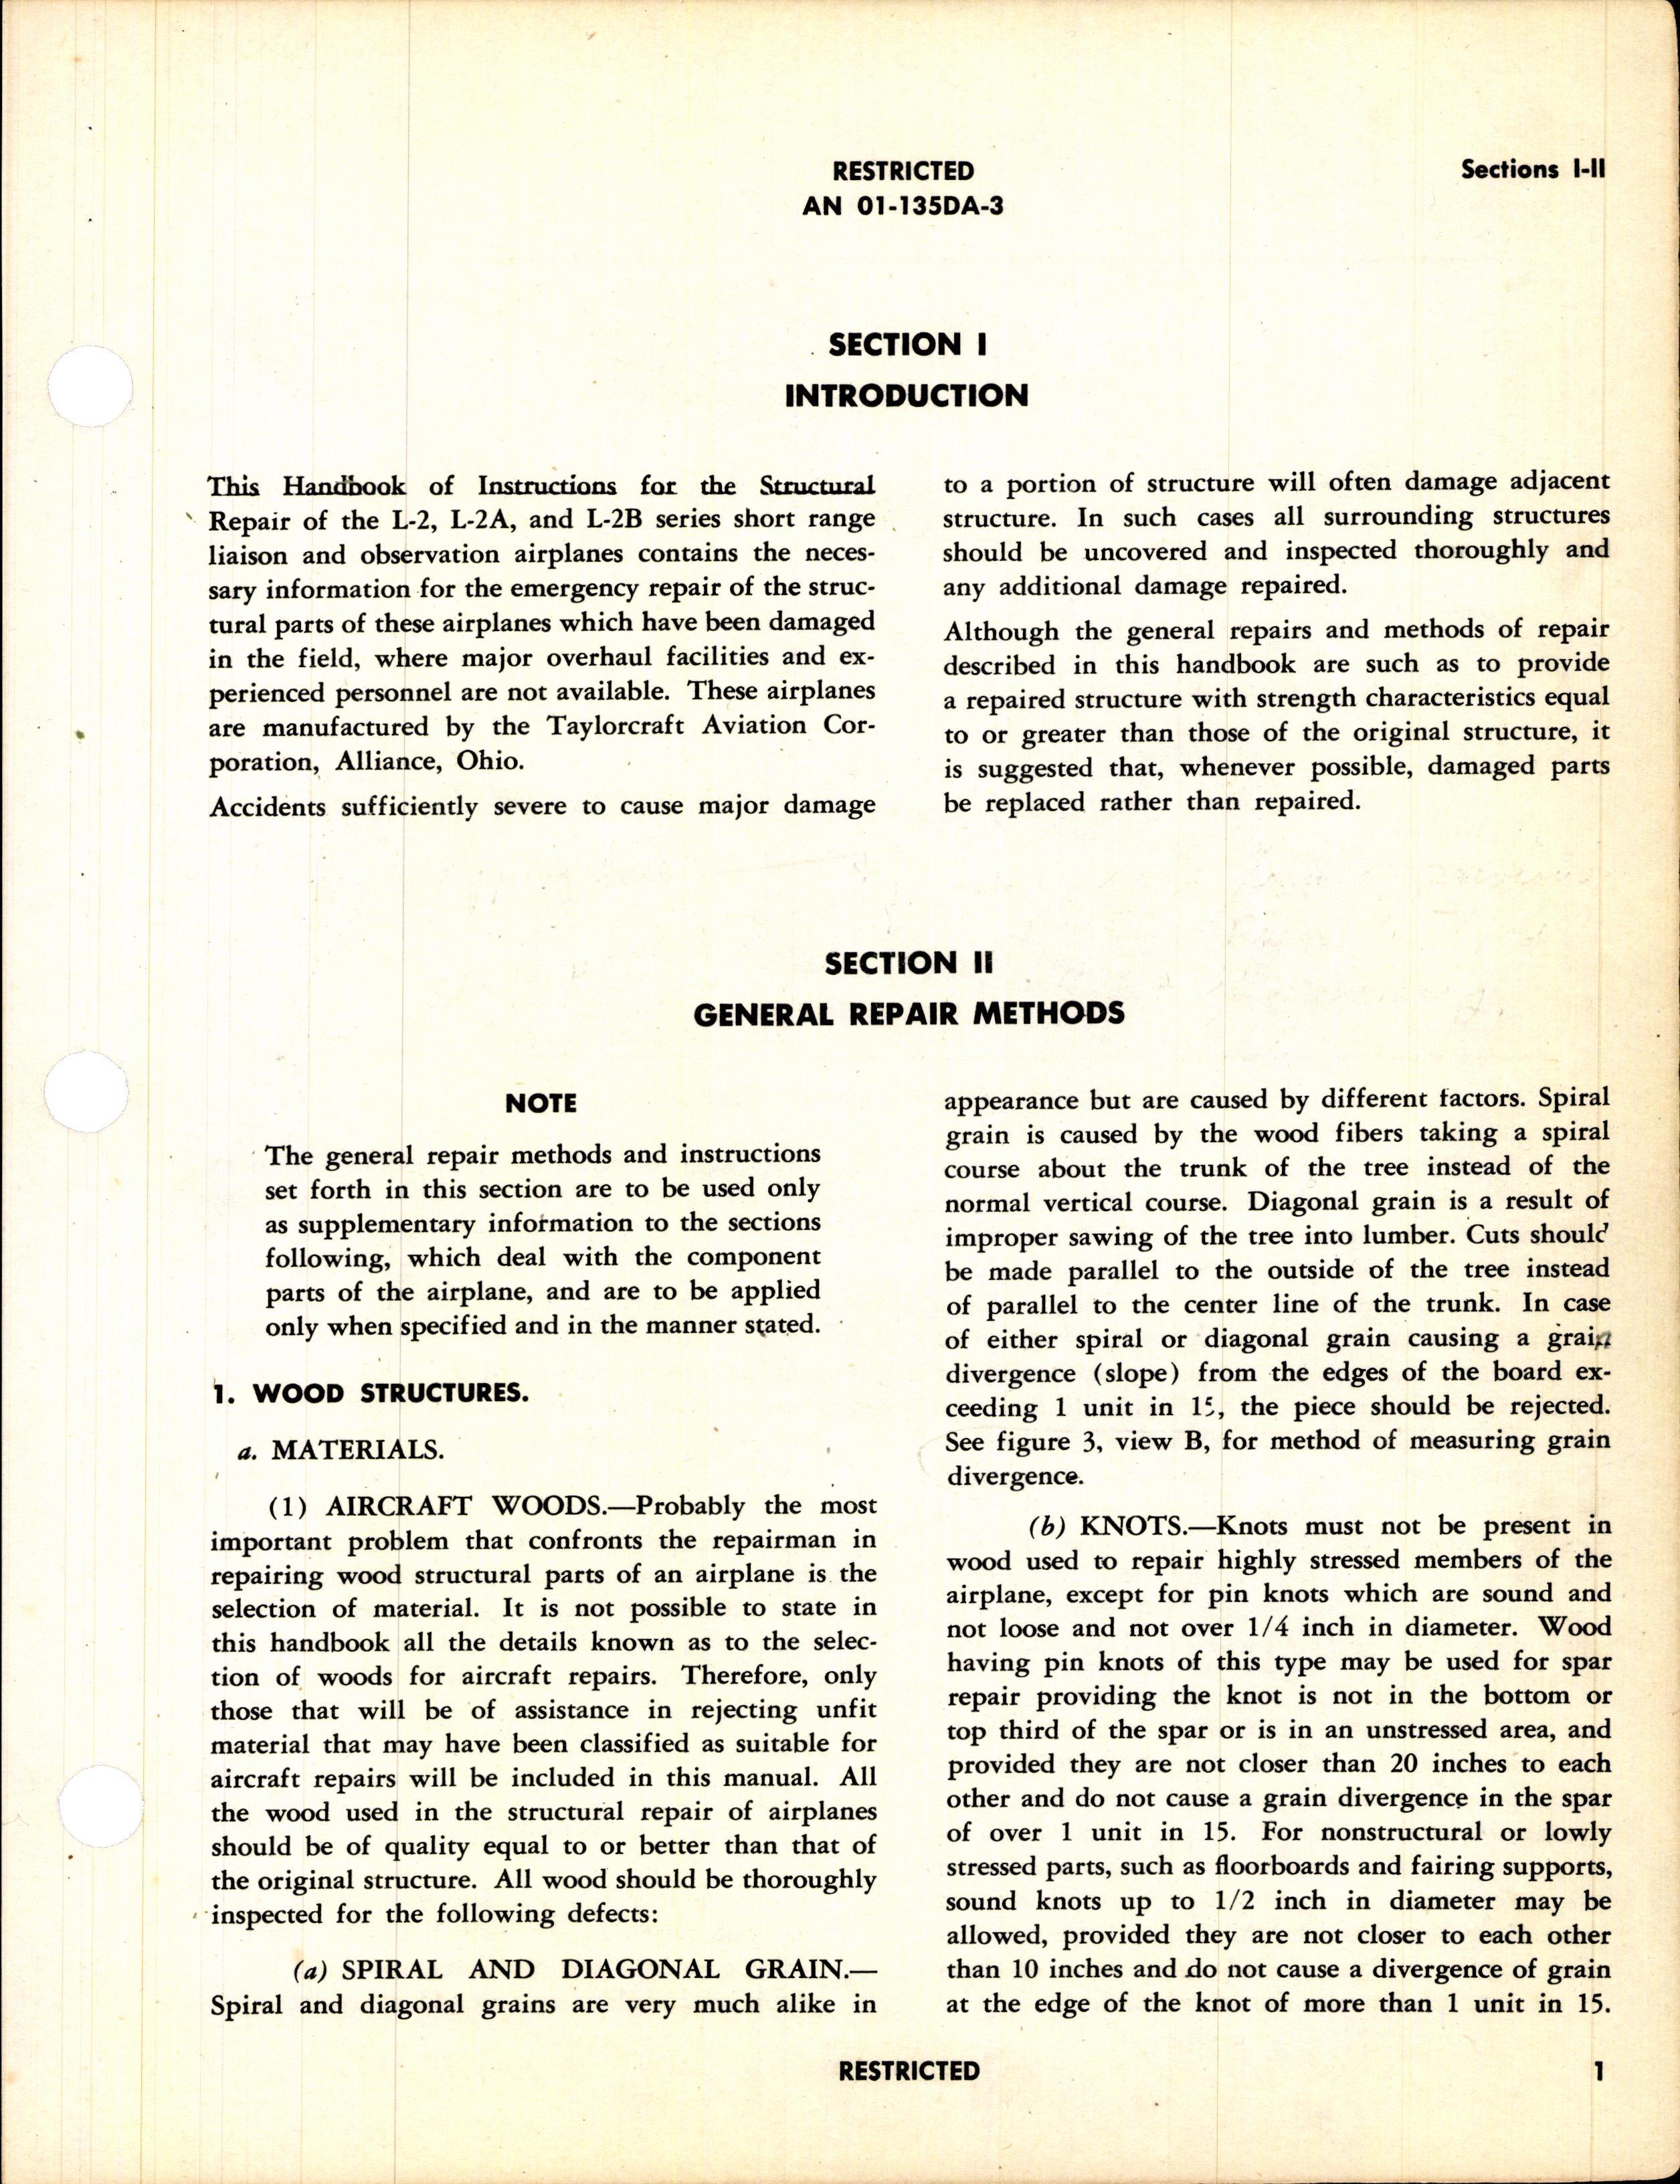 Sample page 9 from AirCorps Library document: Structural Repair Instructions for L-2, L-2A, and L-2B Airplanes